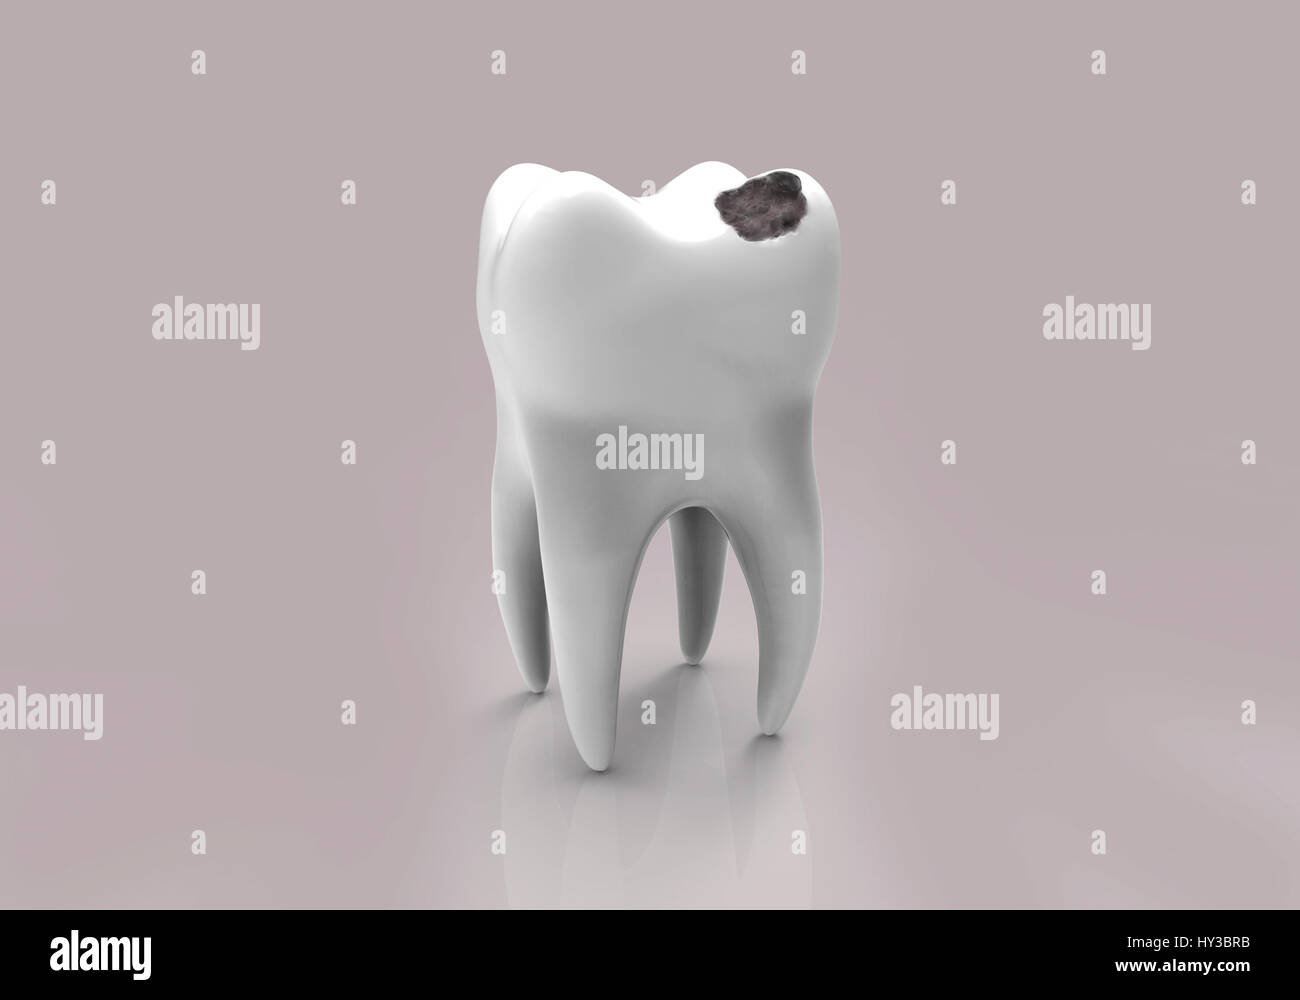 Tooth decay. Computer illustration of a tooth with a cavity. Stock Photo